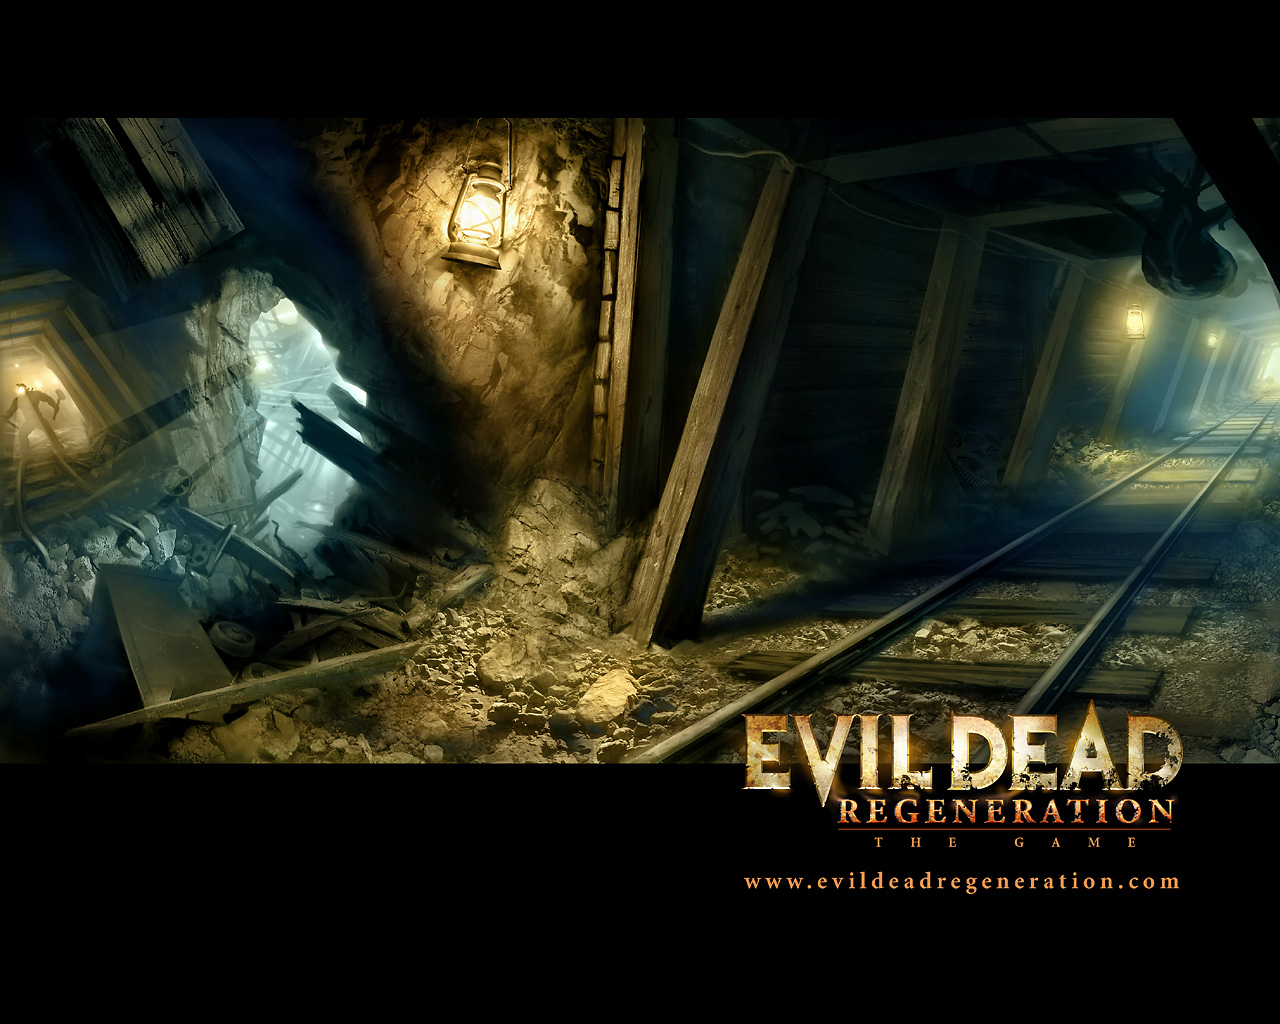 Celebrity Bollywood Movie And Wallpaper: Free Evil Dead wallpaper is